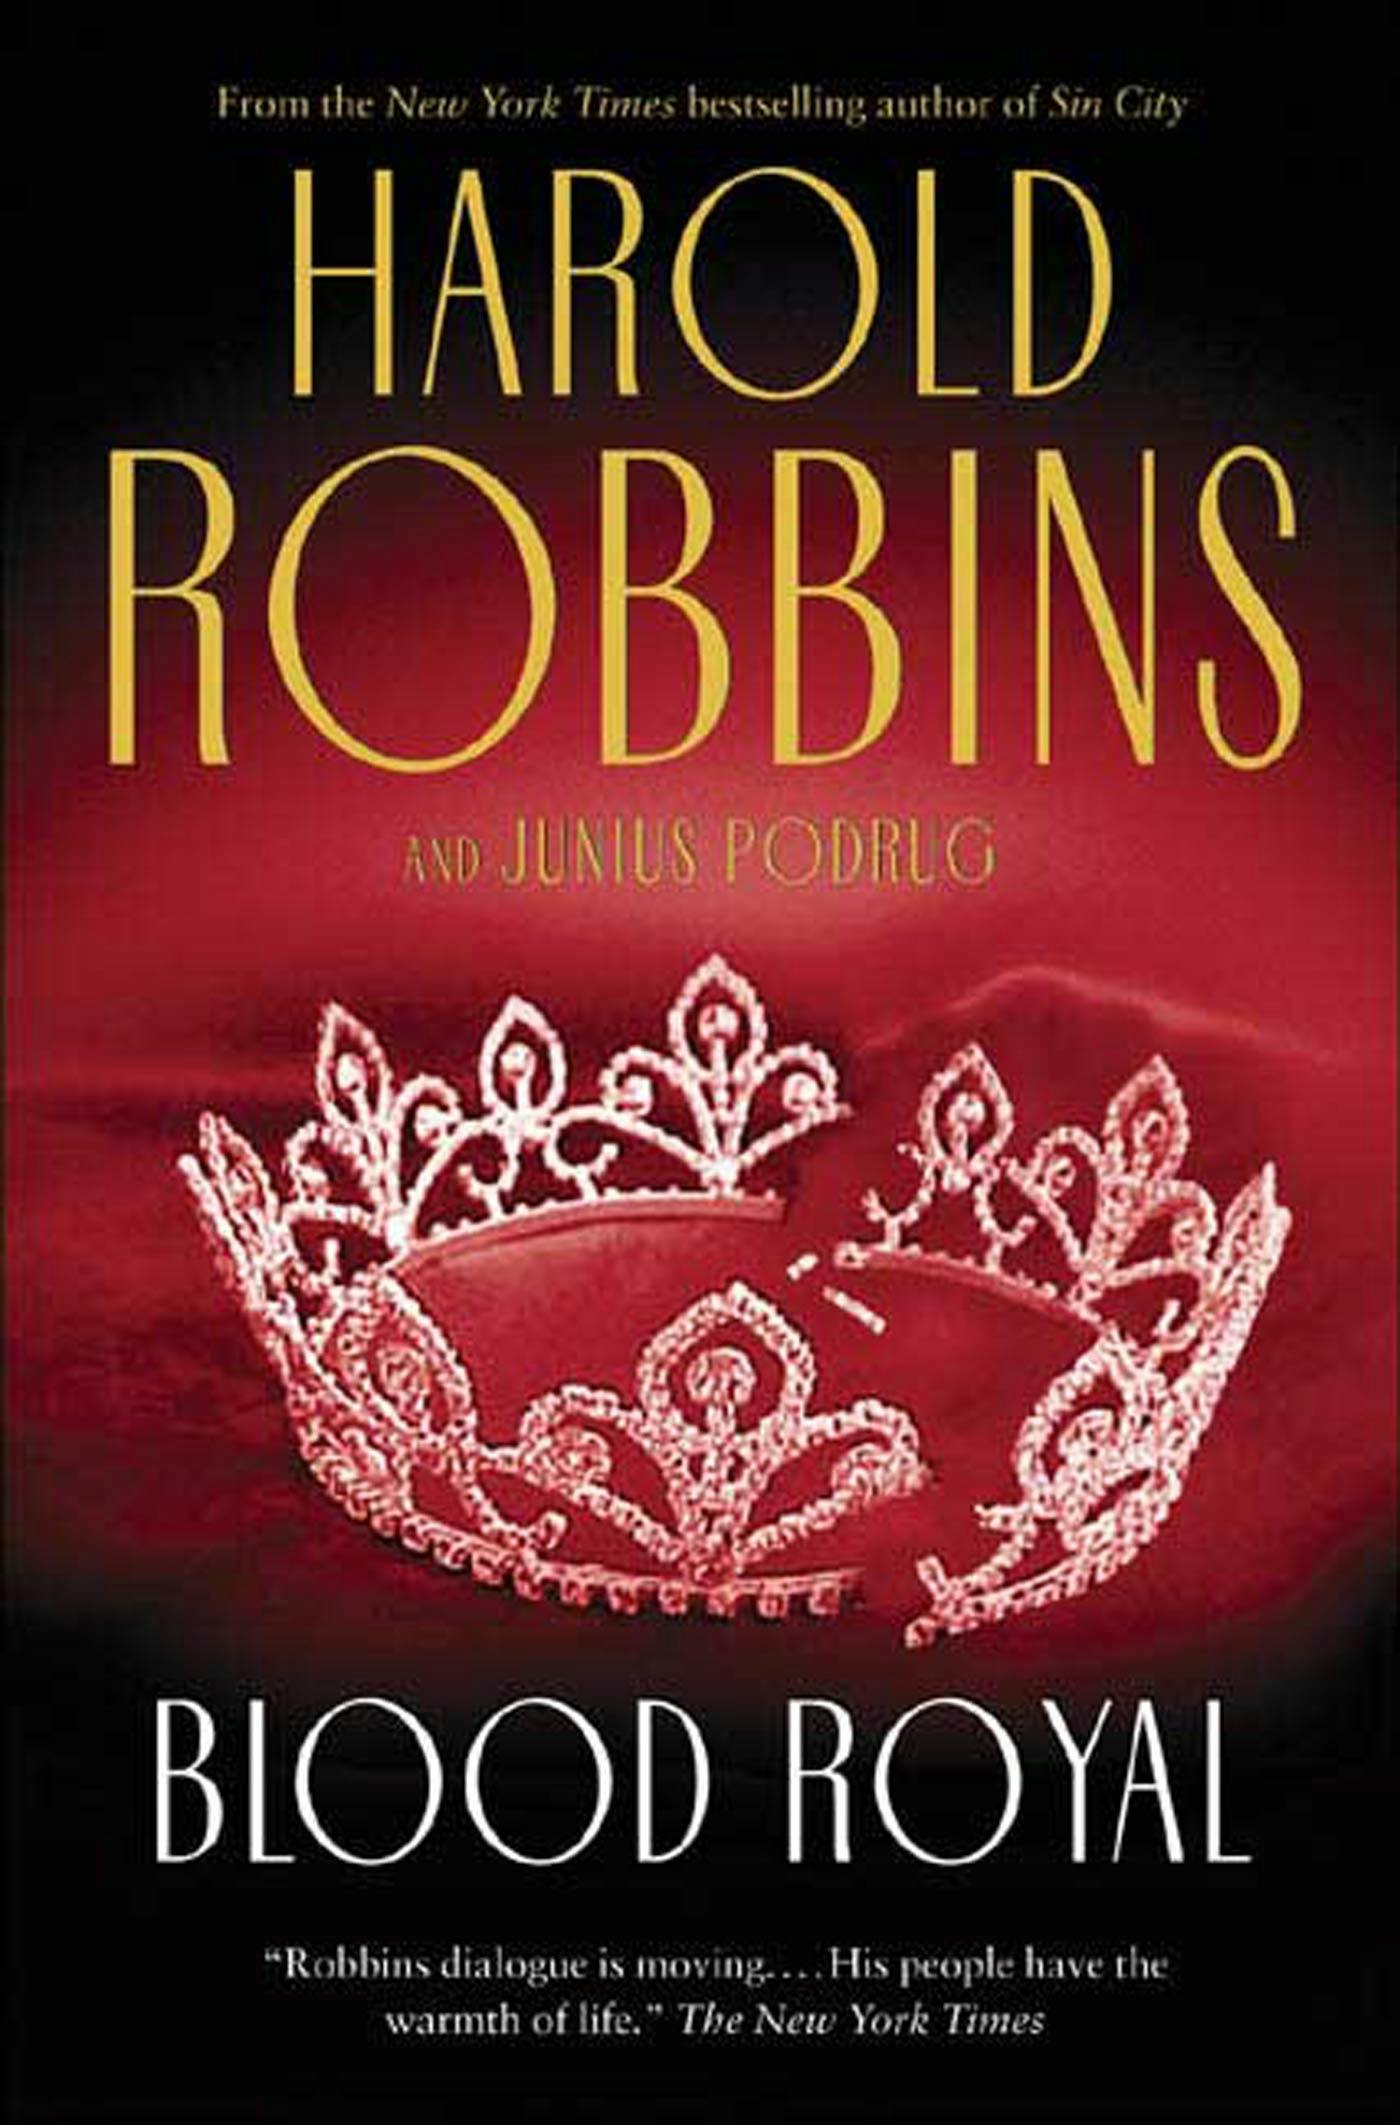 Cover for the book titled as: Blood Royal